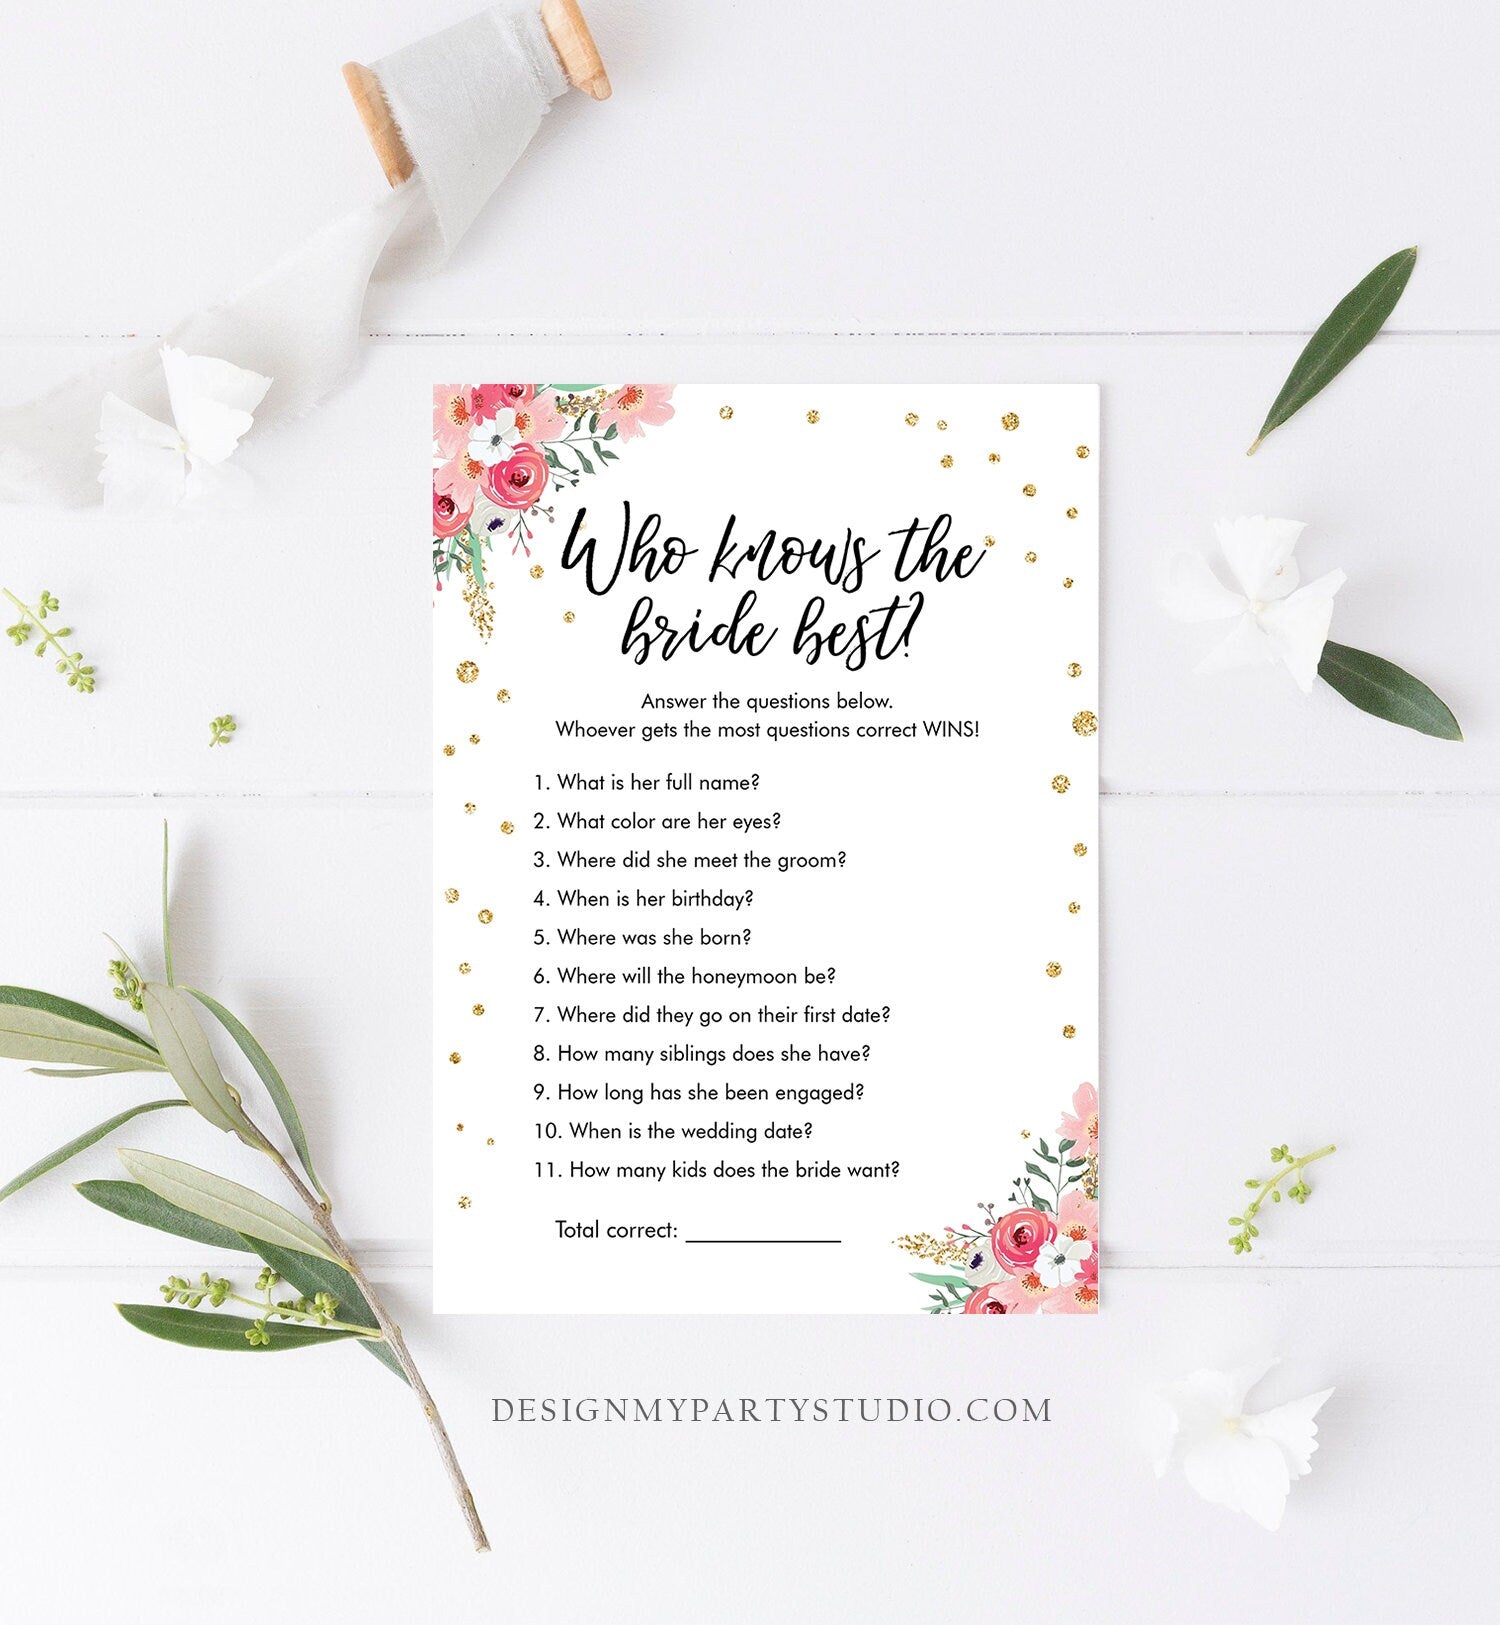 Editable Who Knows the Bride Best Bridal Shower Game Wedding Shower Activity Floral Pink Gold Confetti Corjl Template Printable 0030 0318